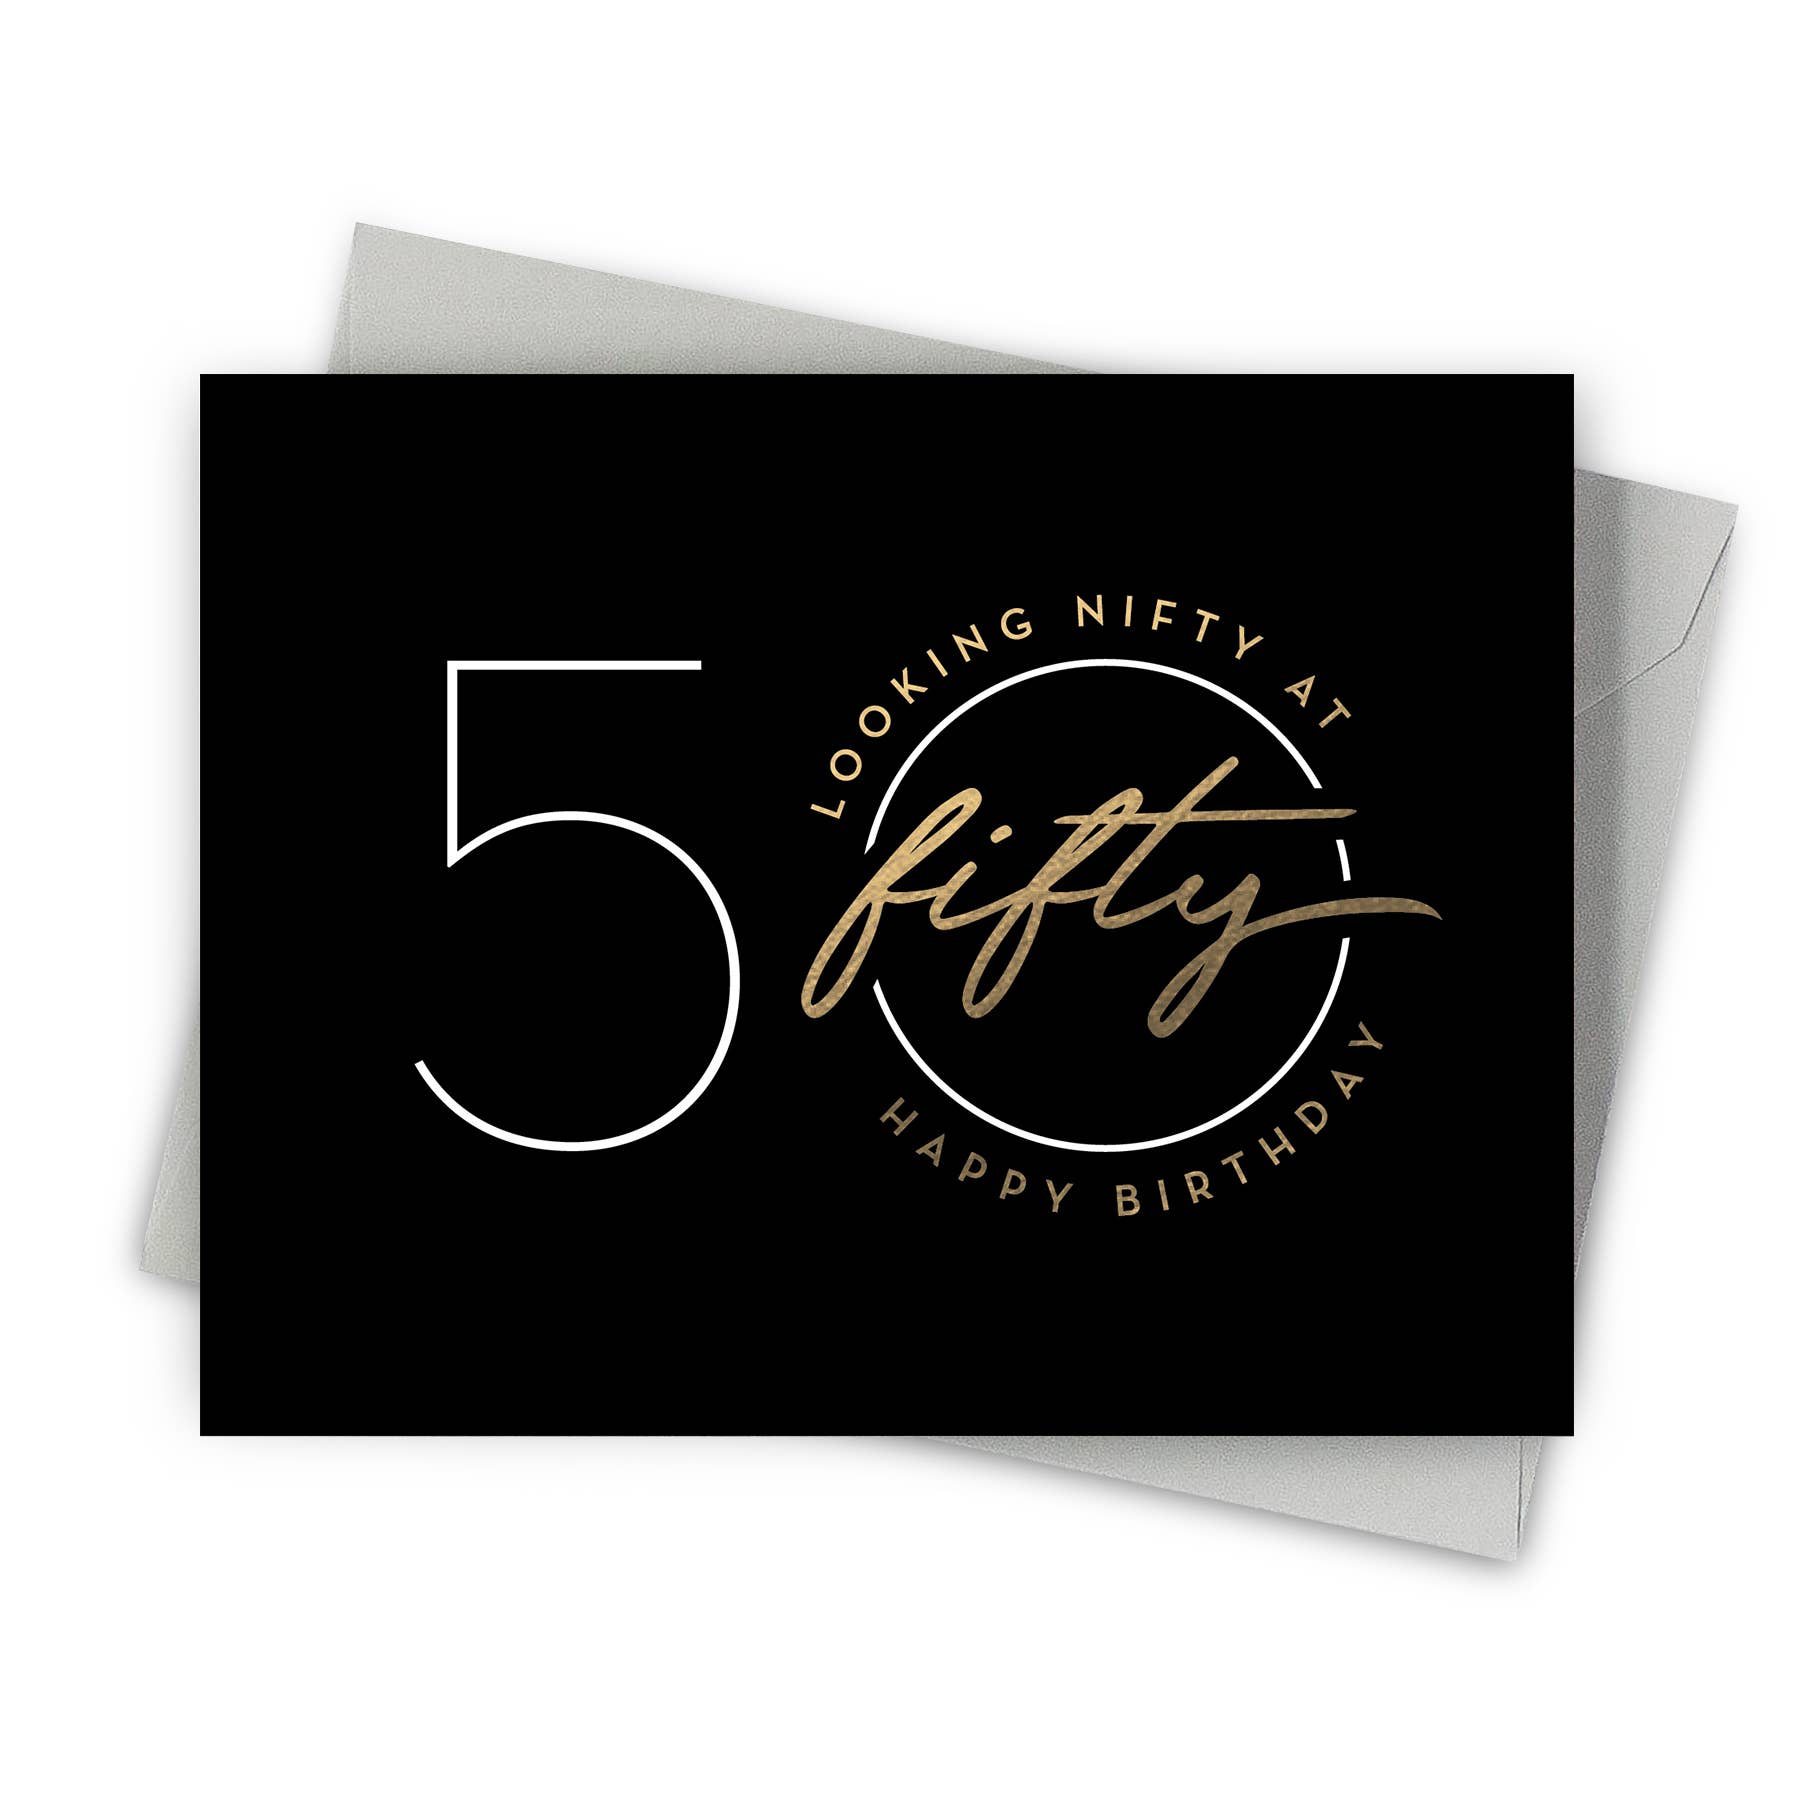 Nifty Fifty – Age Specific Birthday Cards